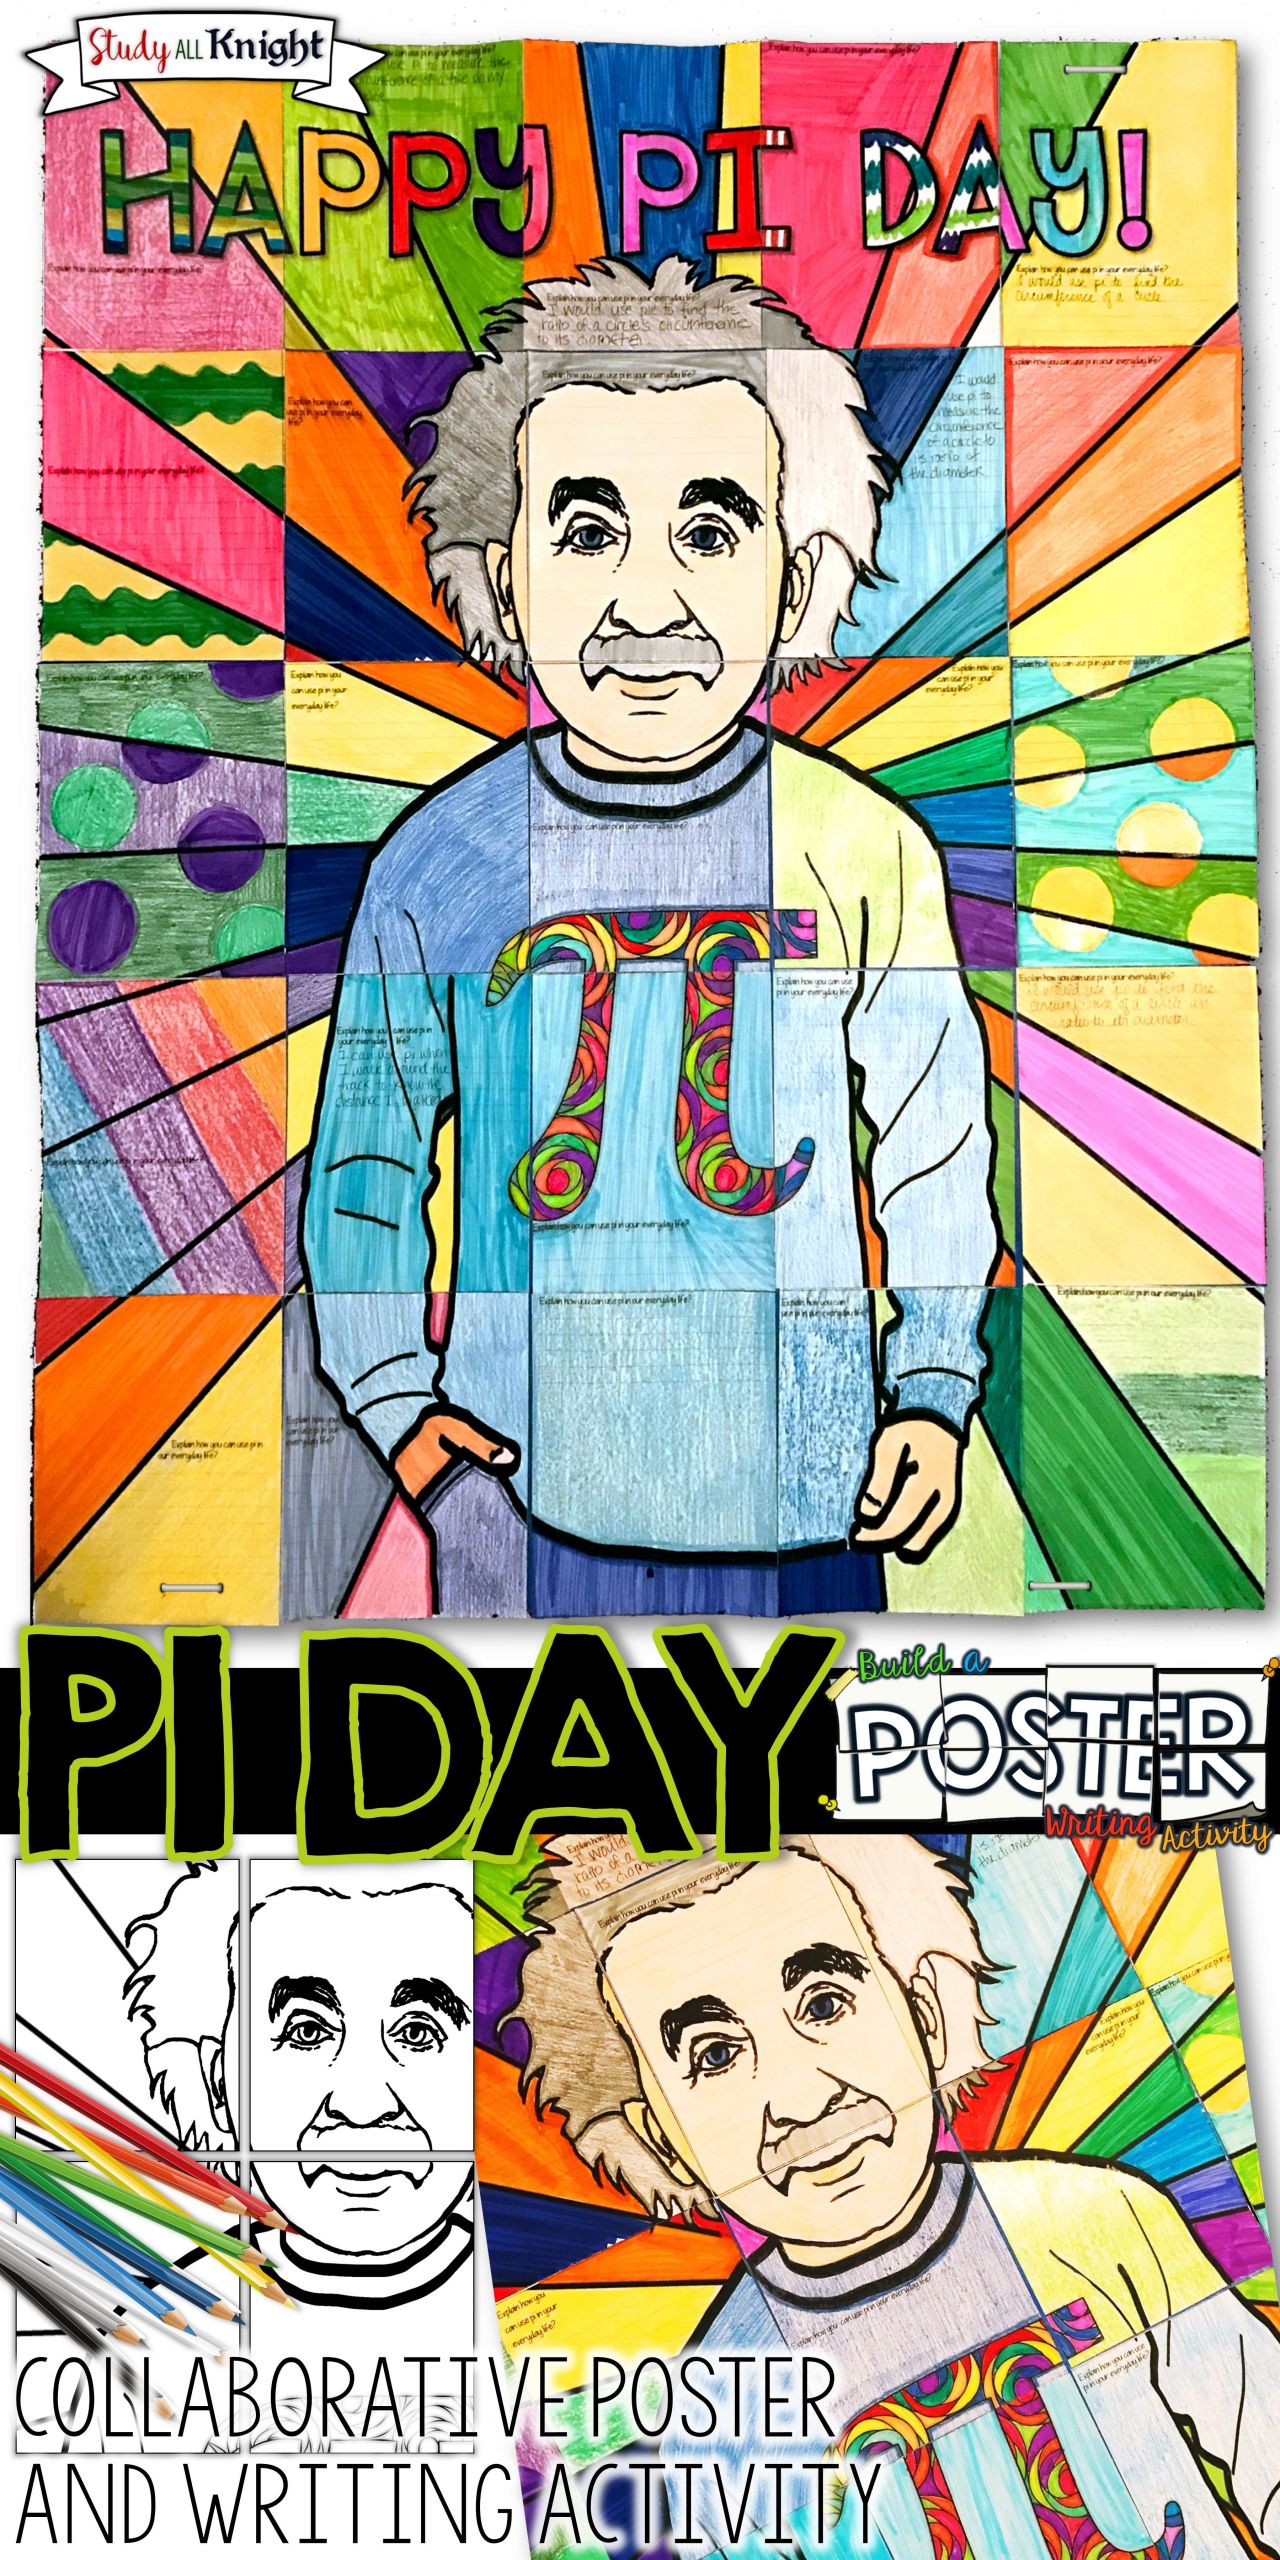 Pi Day Poster Ideas
 PI DAY ACTIVITY COLLABORATIVE POSTER WITH WRITING PROMPT